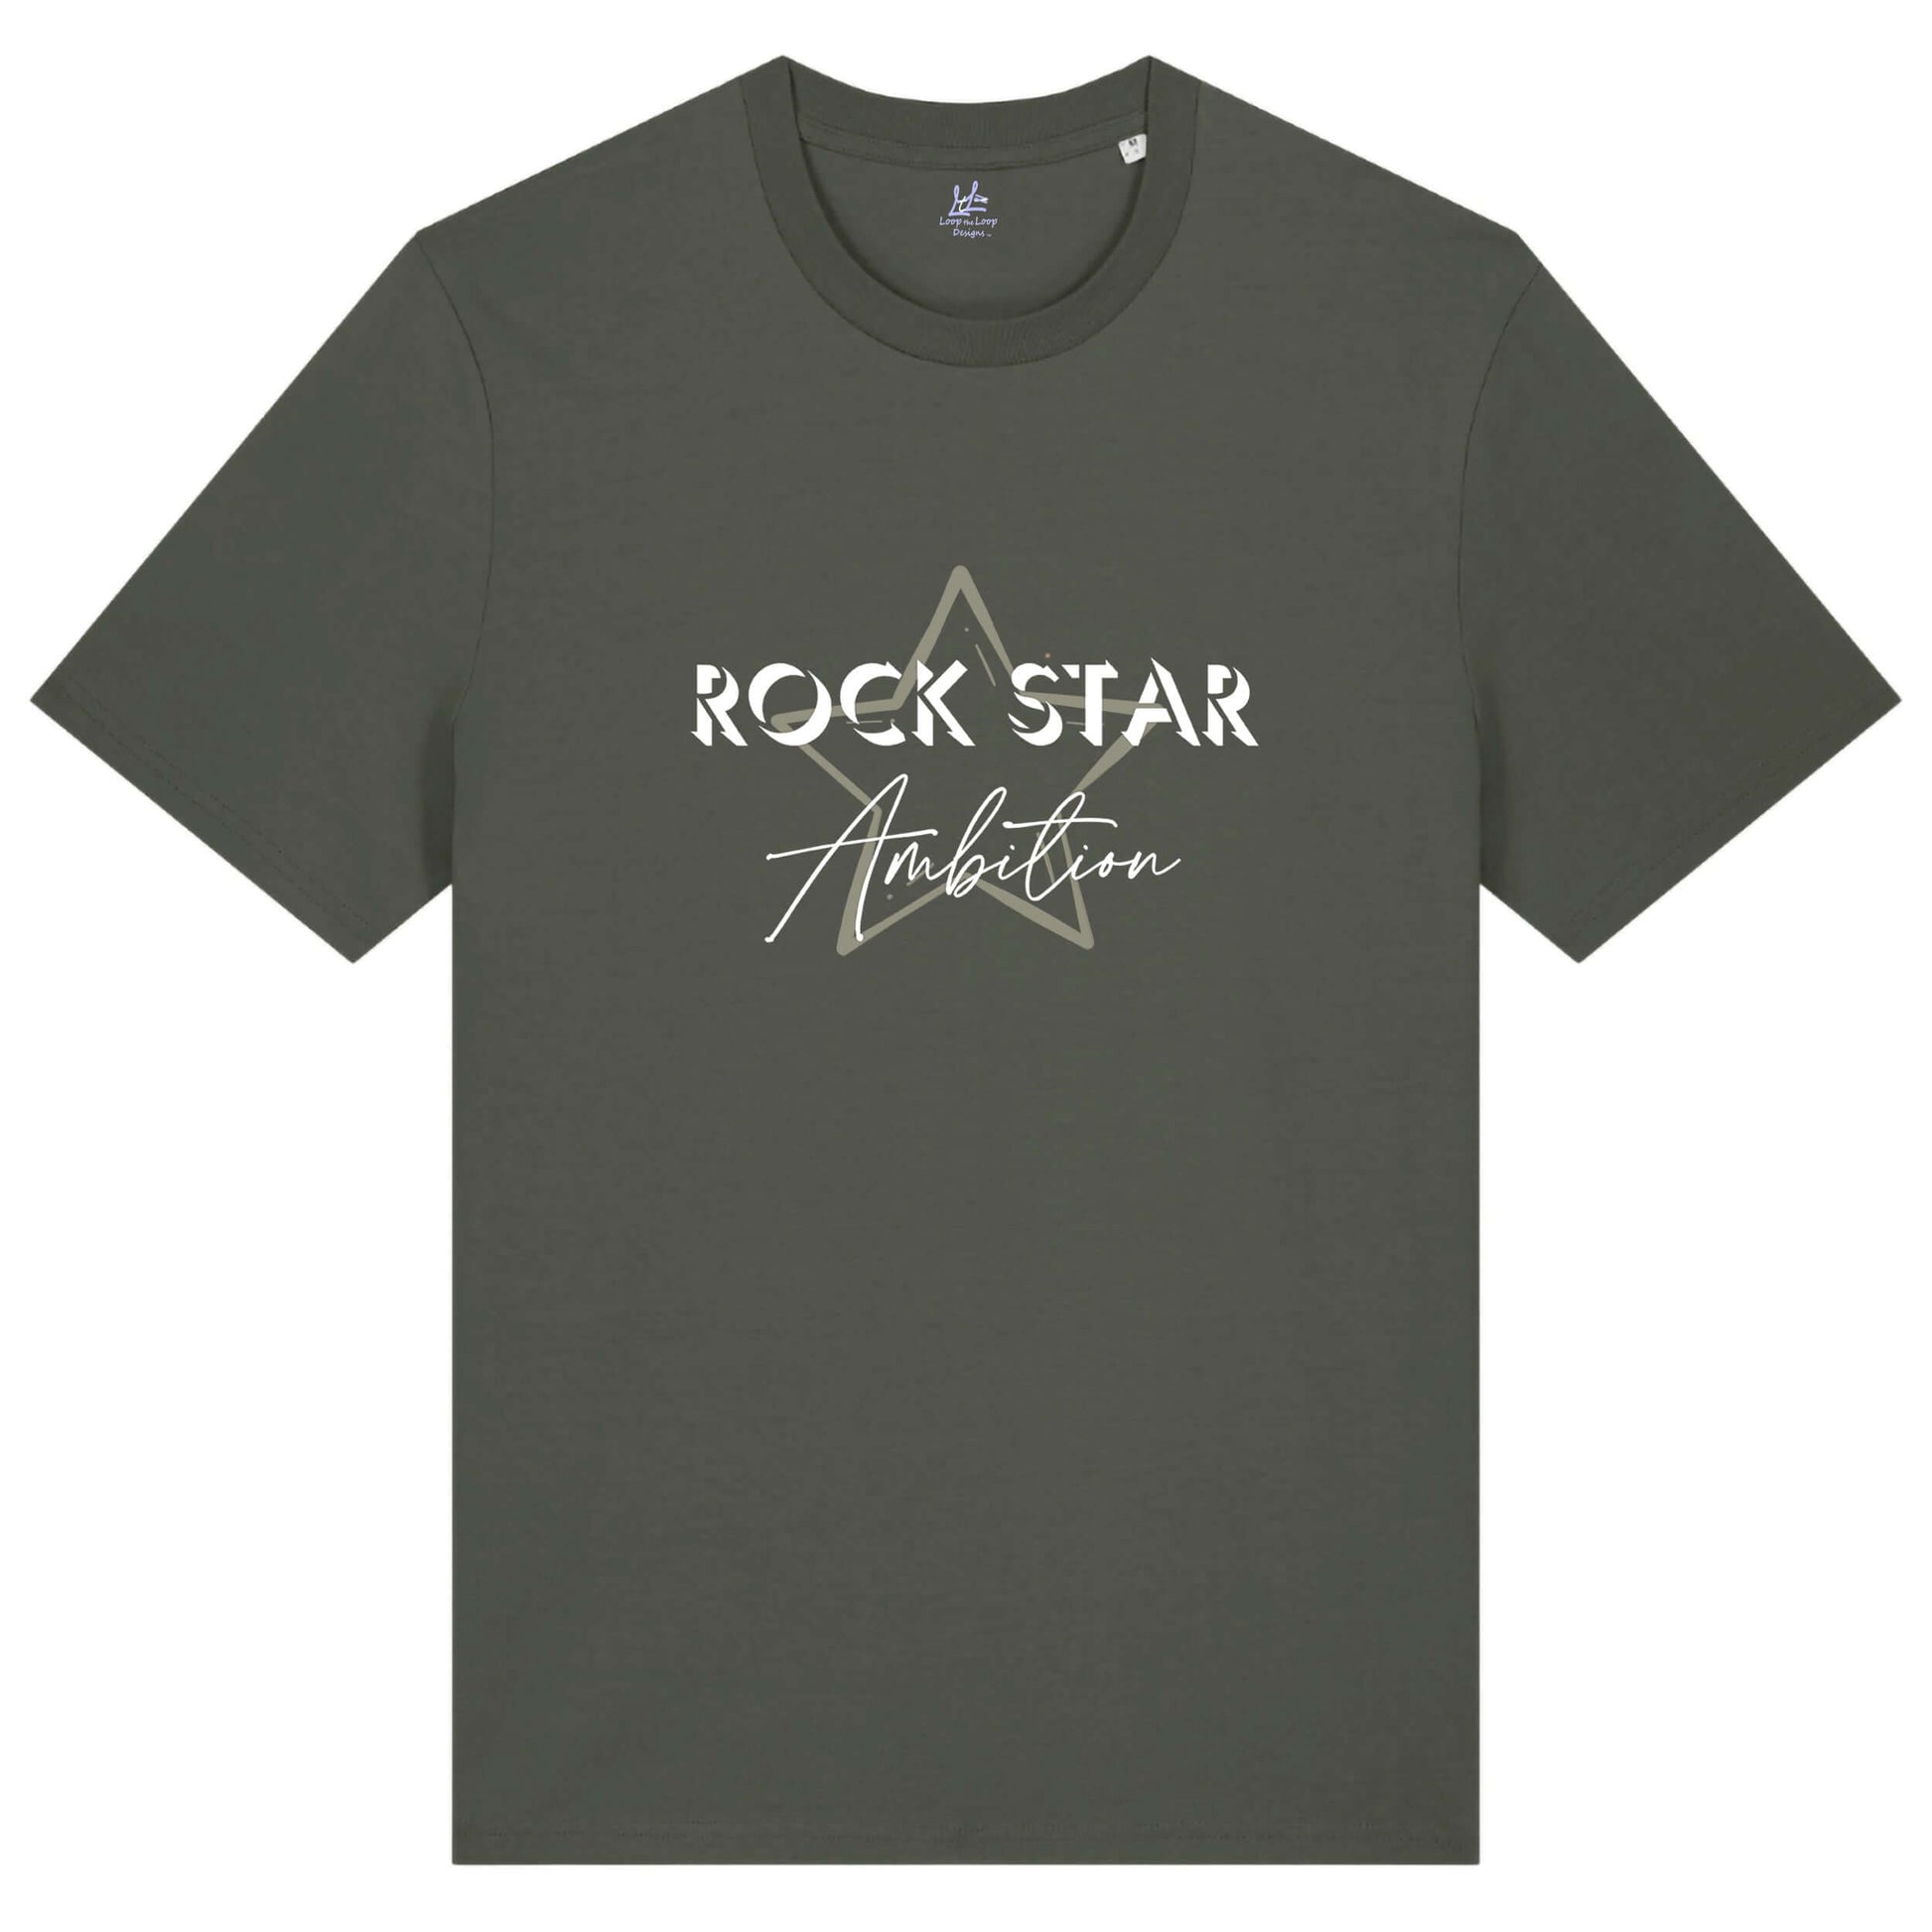 Organic cotton t shirt. Men's khaki grey / green short sleeve graphic tshirt. Crew neck casual wear. Band Tee Design is light khaki star outline behind wording "ROCK STAR" in upper case shadowed  white text, then "Ambition" below in white script text. Casual unisex top